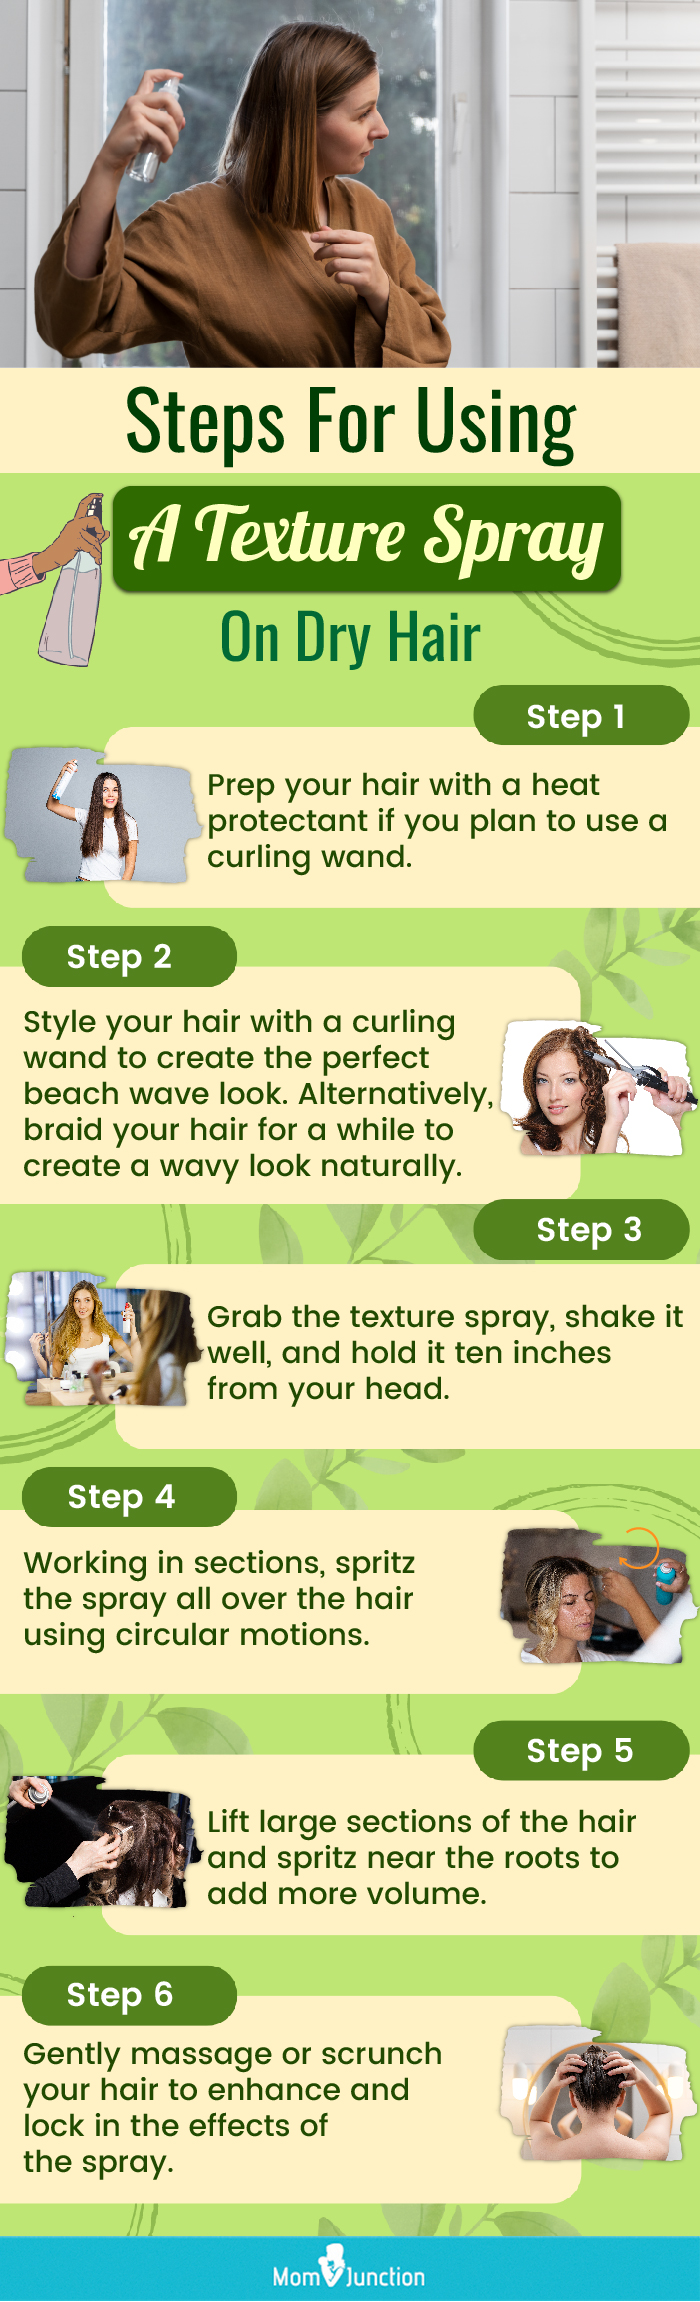 Steps For Using A Texture Spray On Dry Hair (infographic)